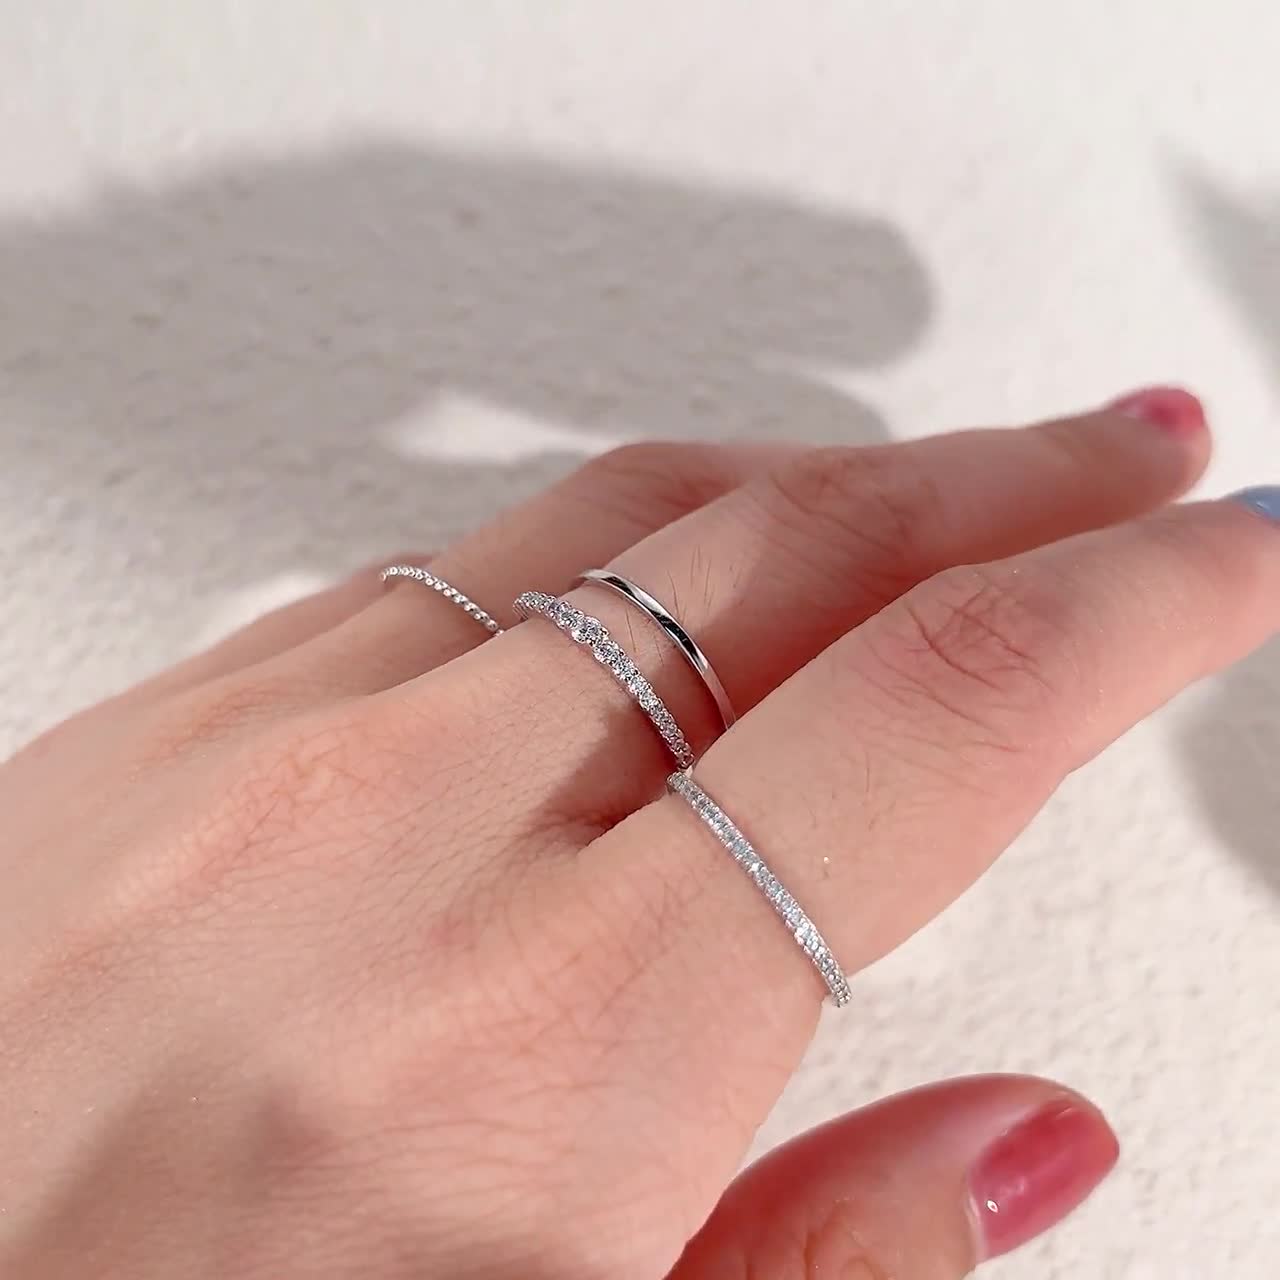 Simple Set Set Sterling of Minimalist 4, 925 Delicate Silver Rings Thin Stacking Dainty Ring Ring Gold Diamond Ultra Stackable - Thin Etsy Mixed of